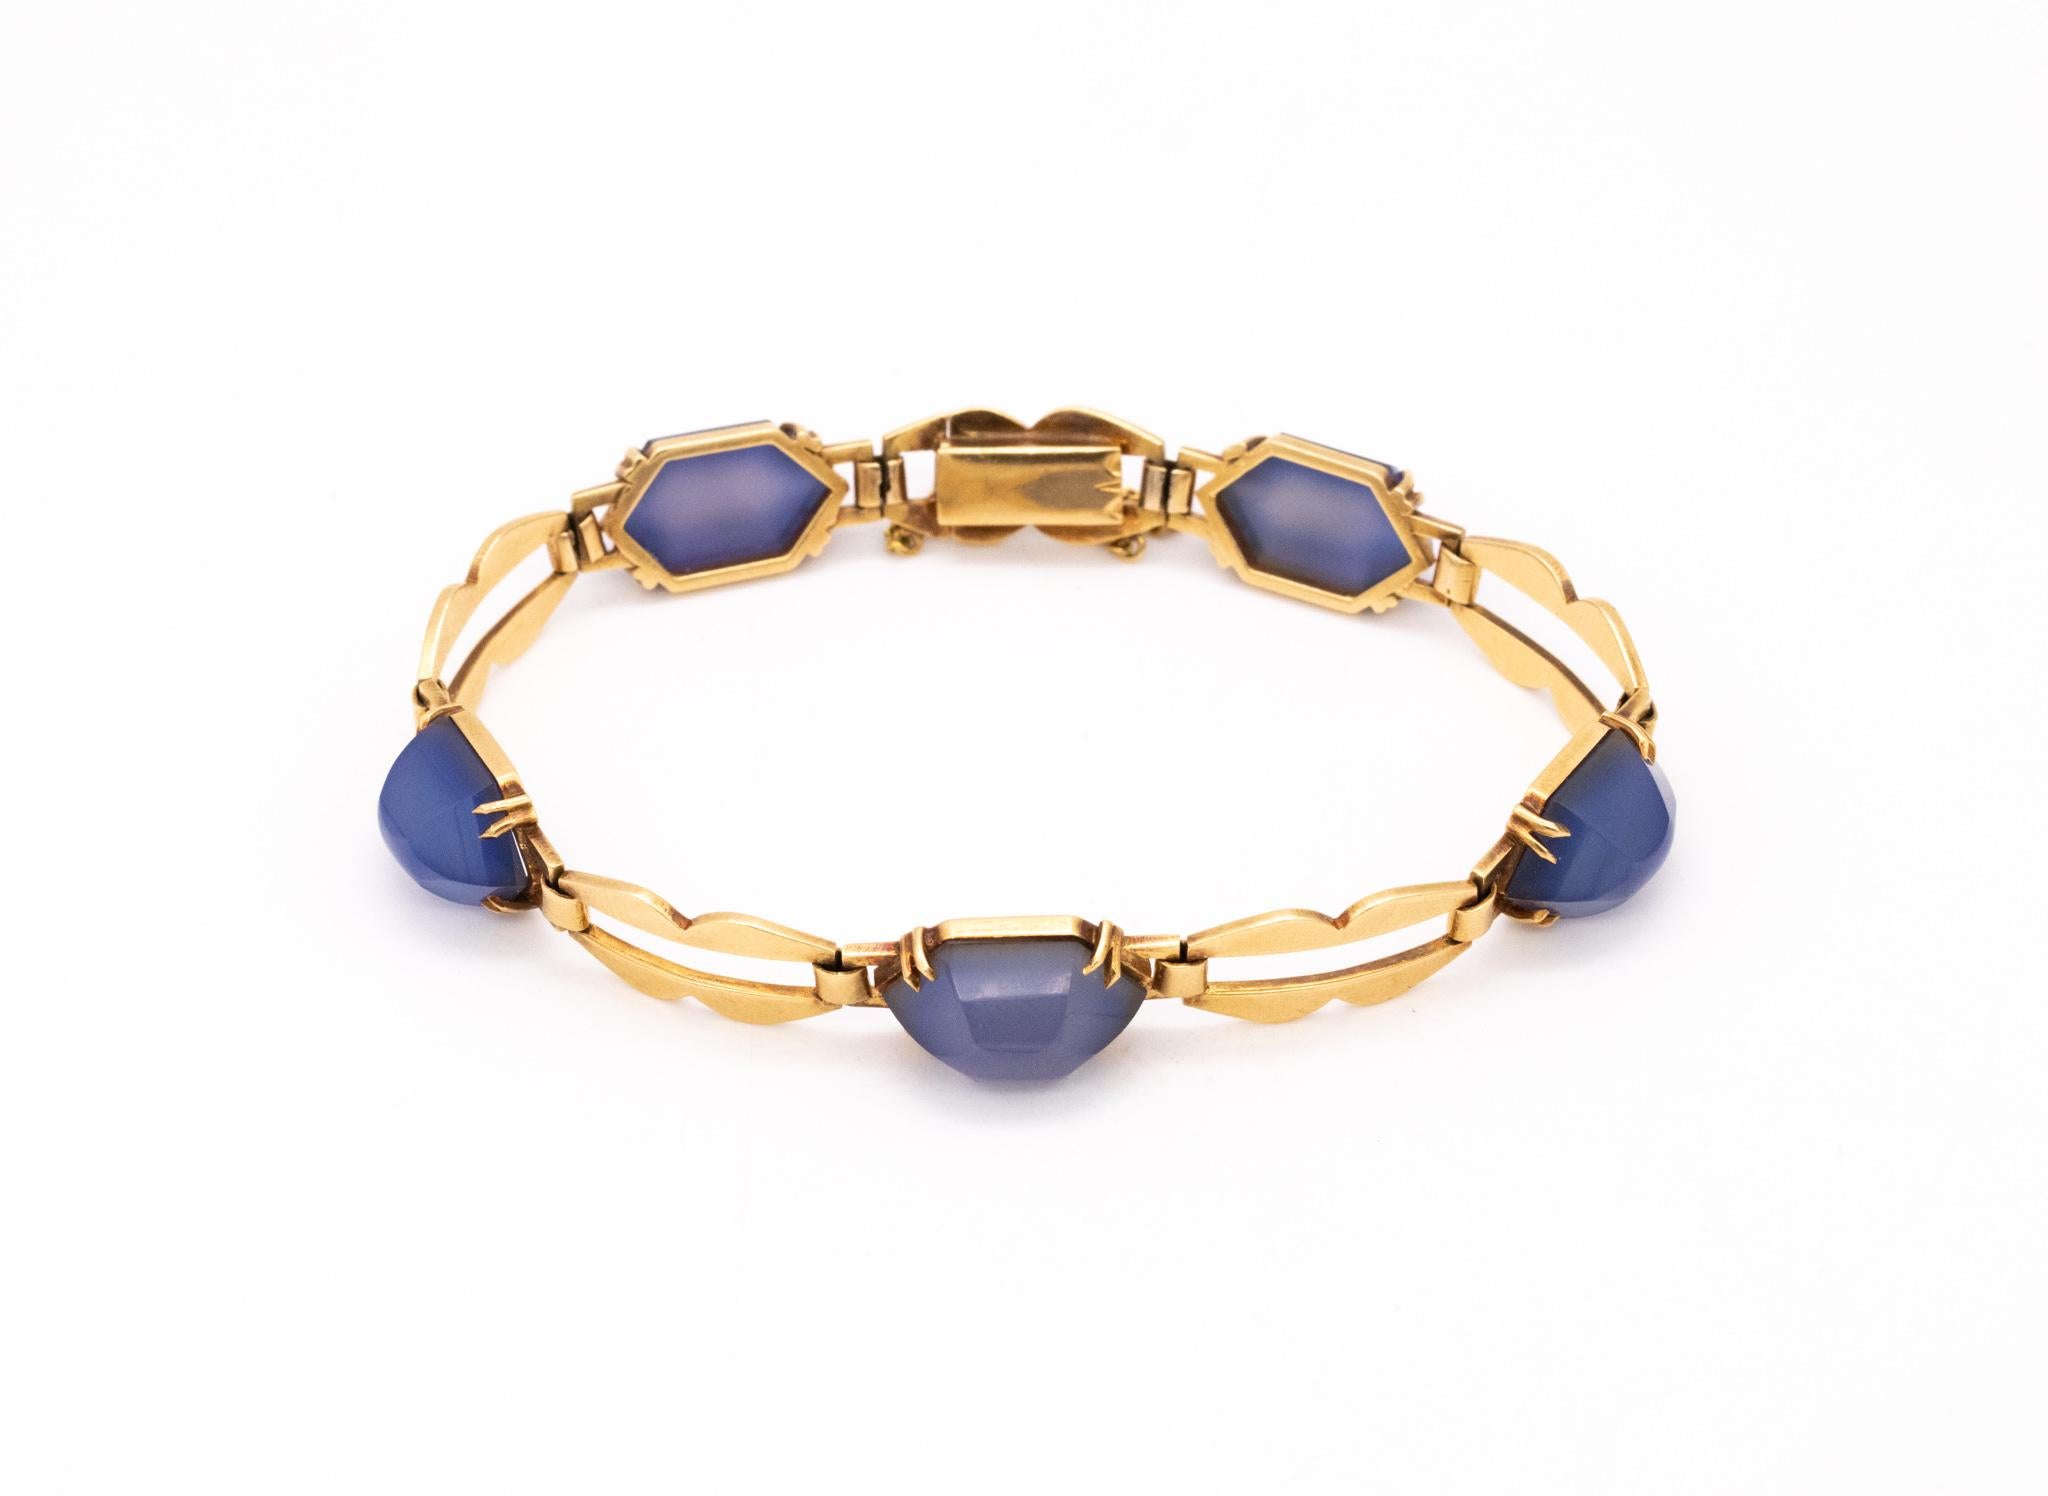 French 1930 Art Deco Bracelet In 18Kt Yellow Gold With 35 Cts Of Blue Chalcedony 4